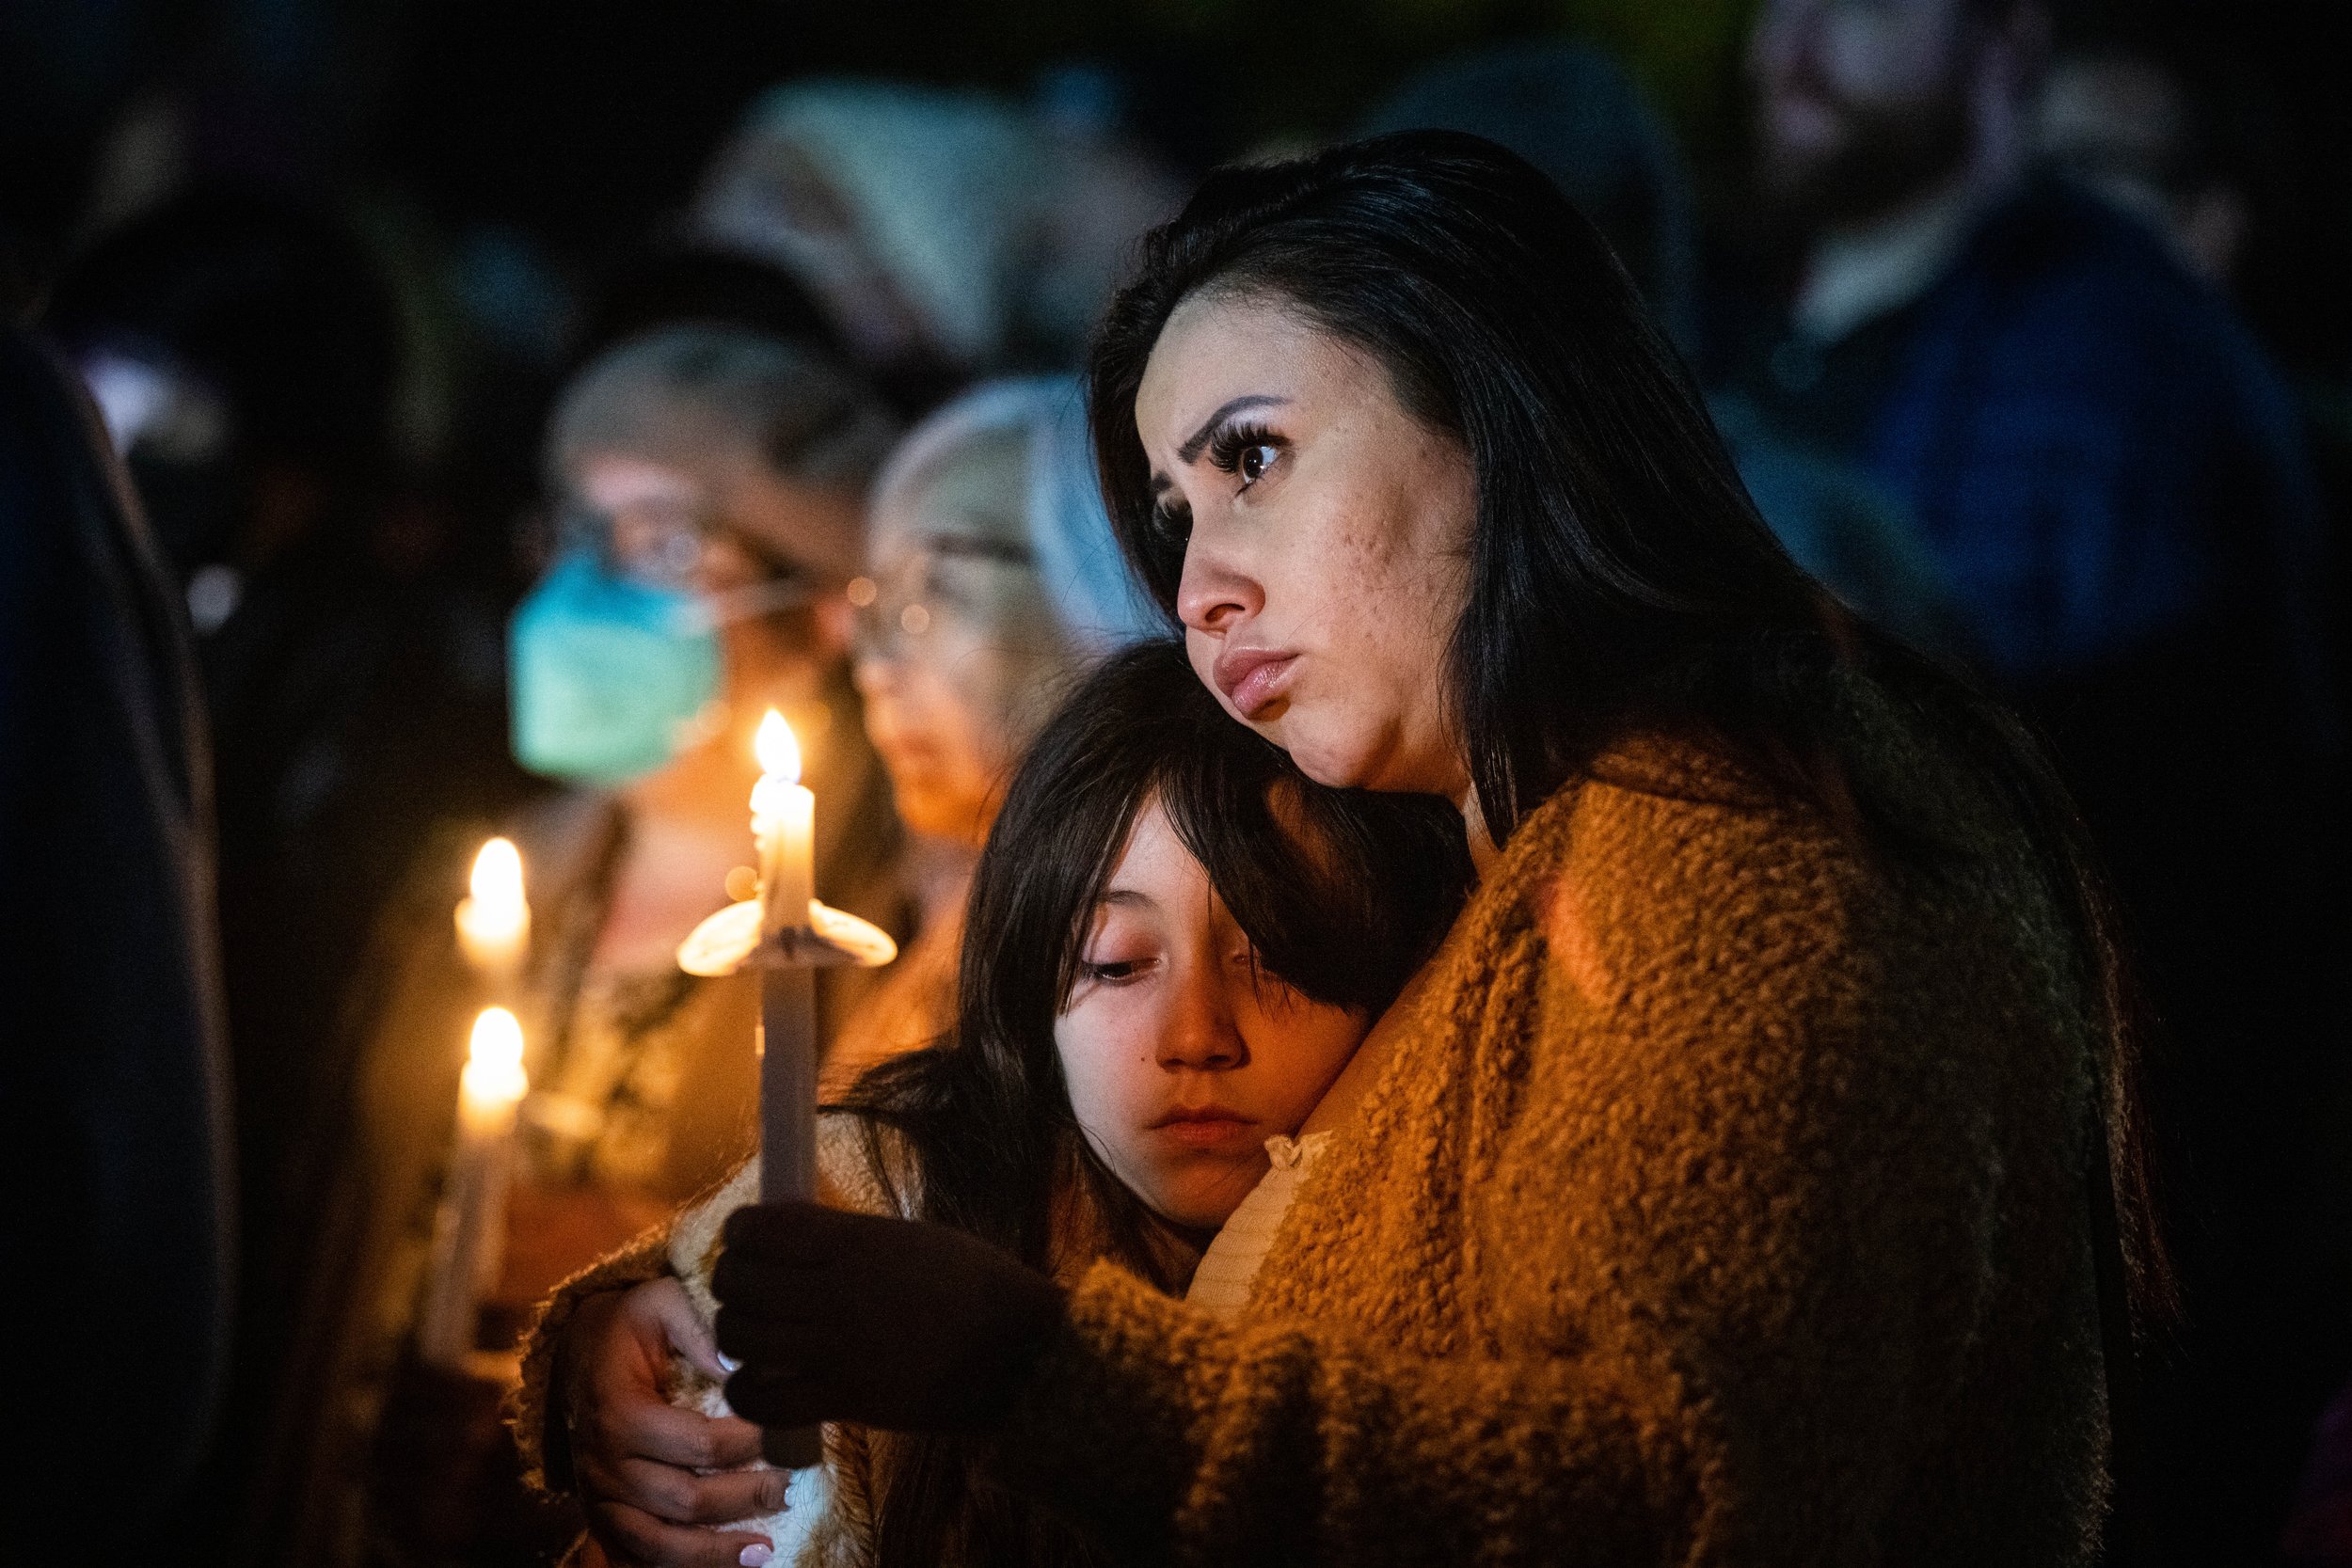  Mourners gather for a candlelight vigil at Monterey Park City Hall on Tuesday, January 24, 2023, to honor the victims of the mass shooting at the Star Ballroom Dance Studio that left 11 people dead and nine others wounded in Monterey Park. 